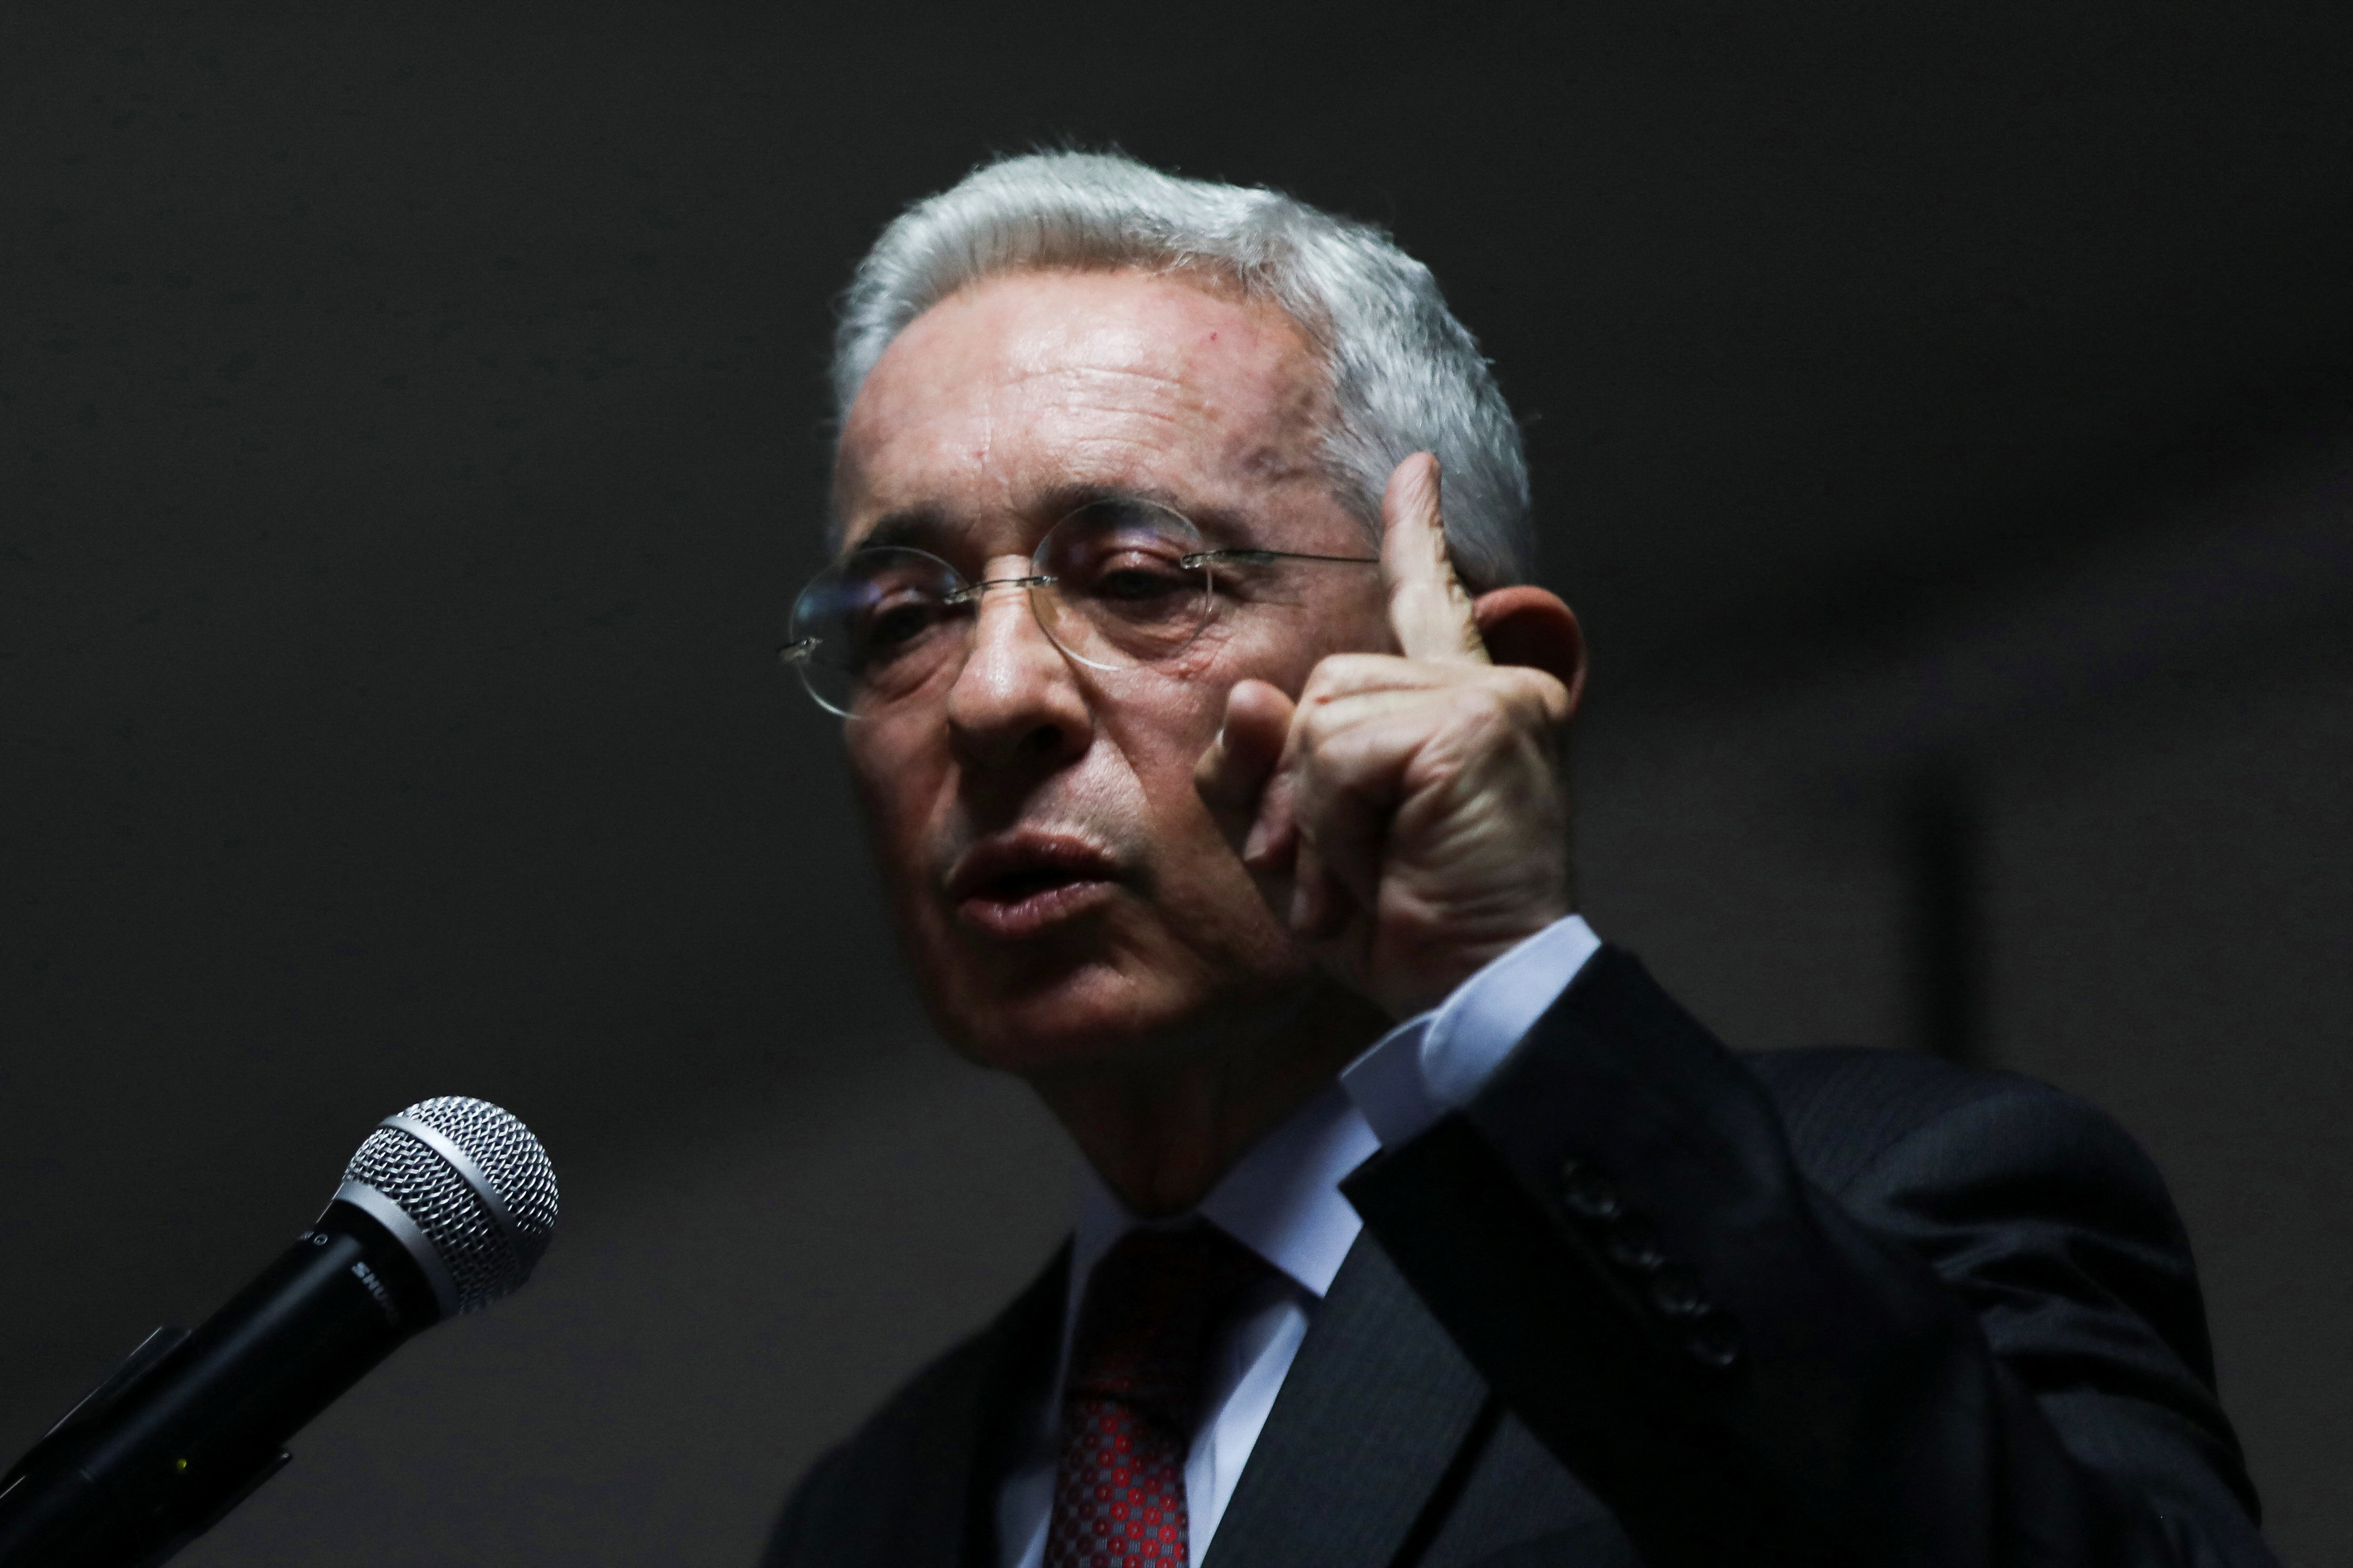 Colombia's former president Alvaro Uribe speaks during a news conference in Bogota, Colombia March 15, 2022. REUTERS/Luisa Gonzalez